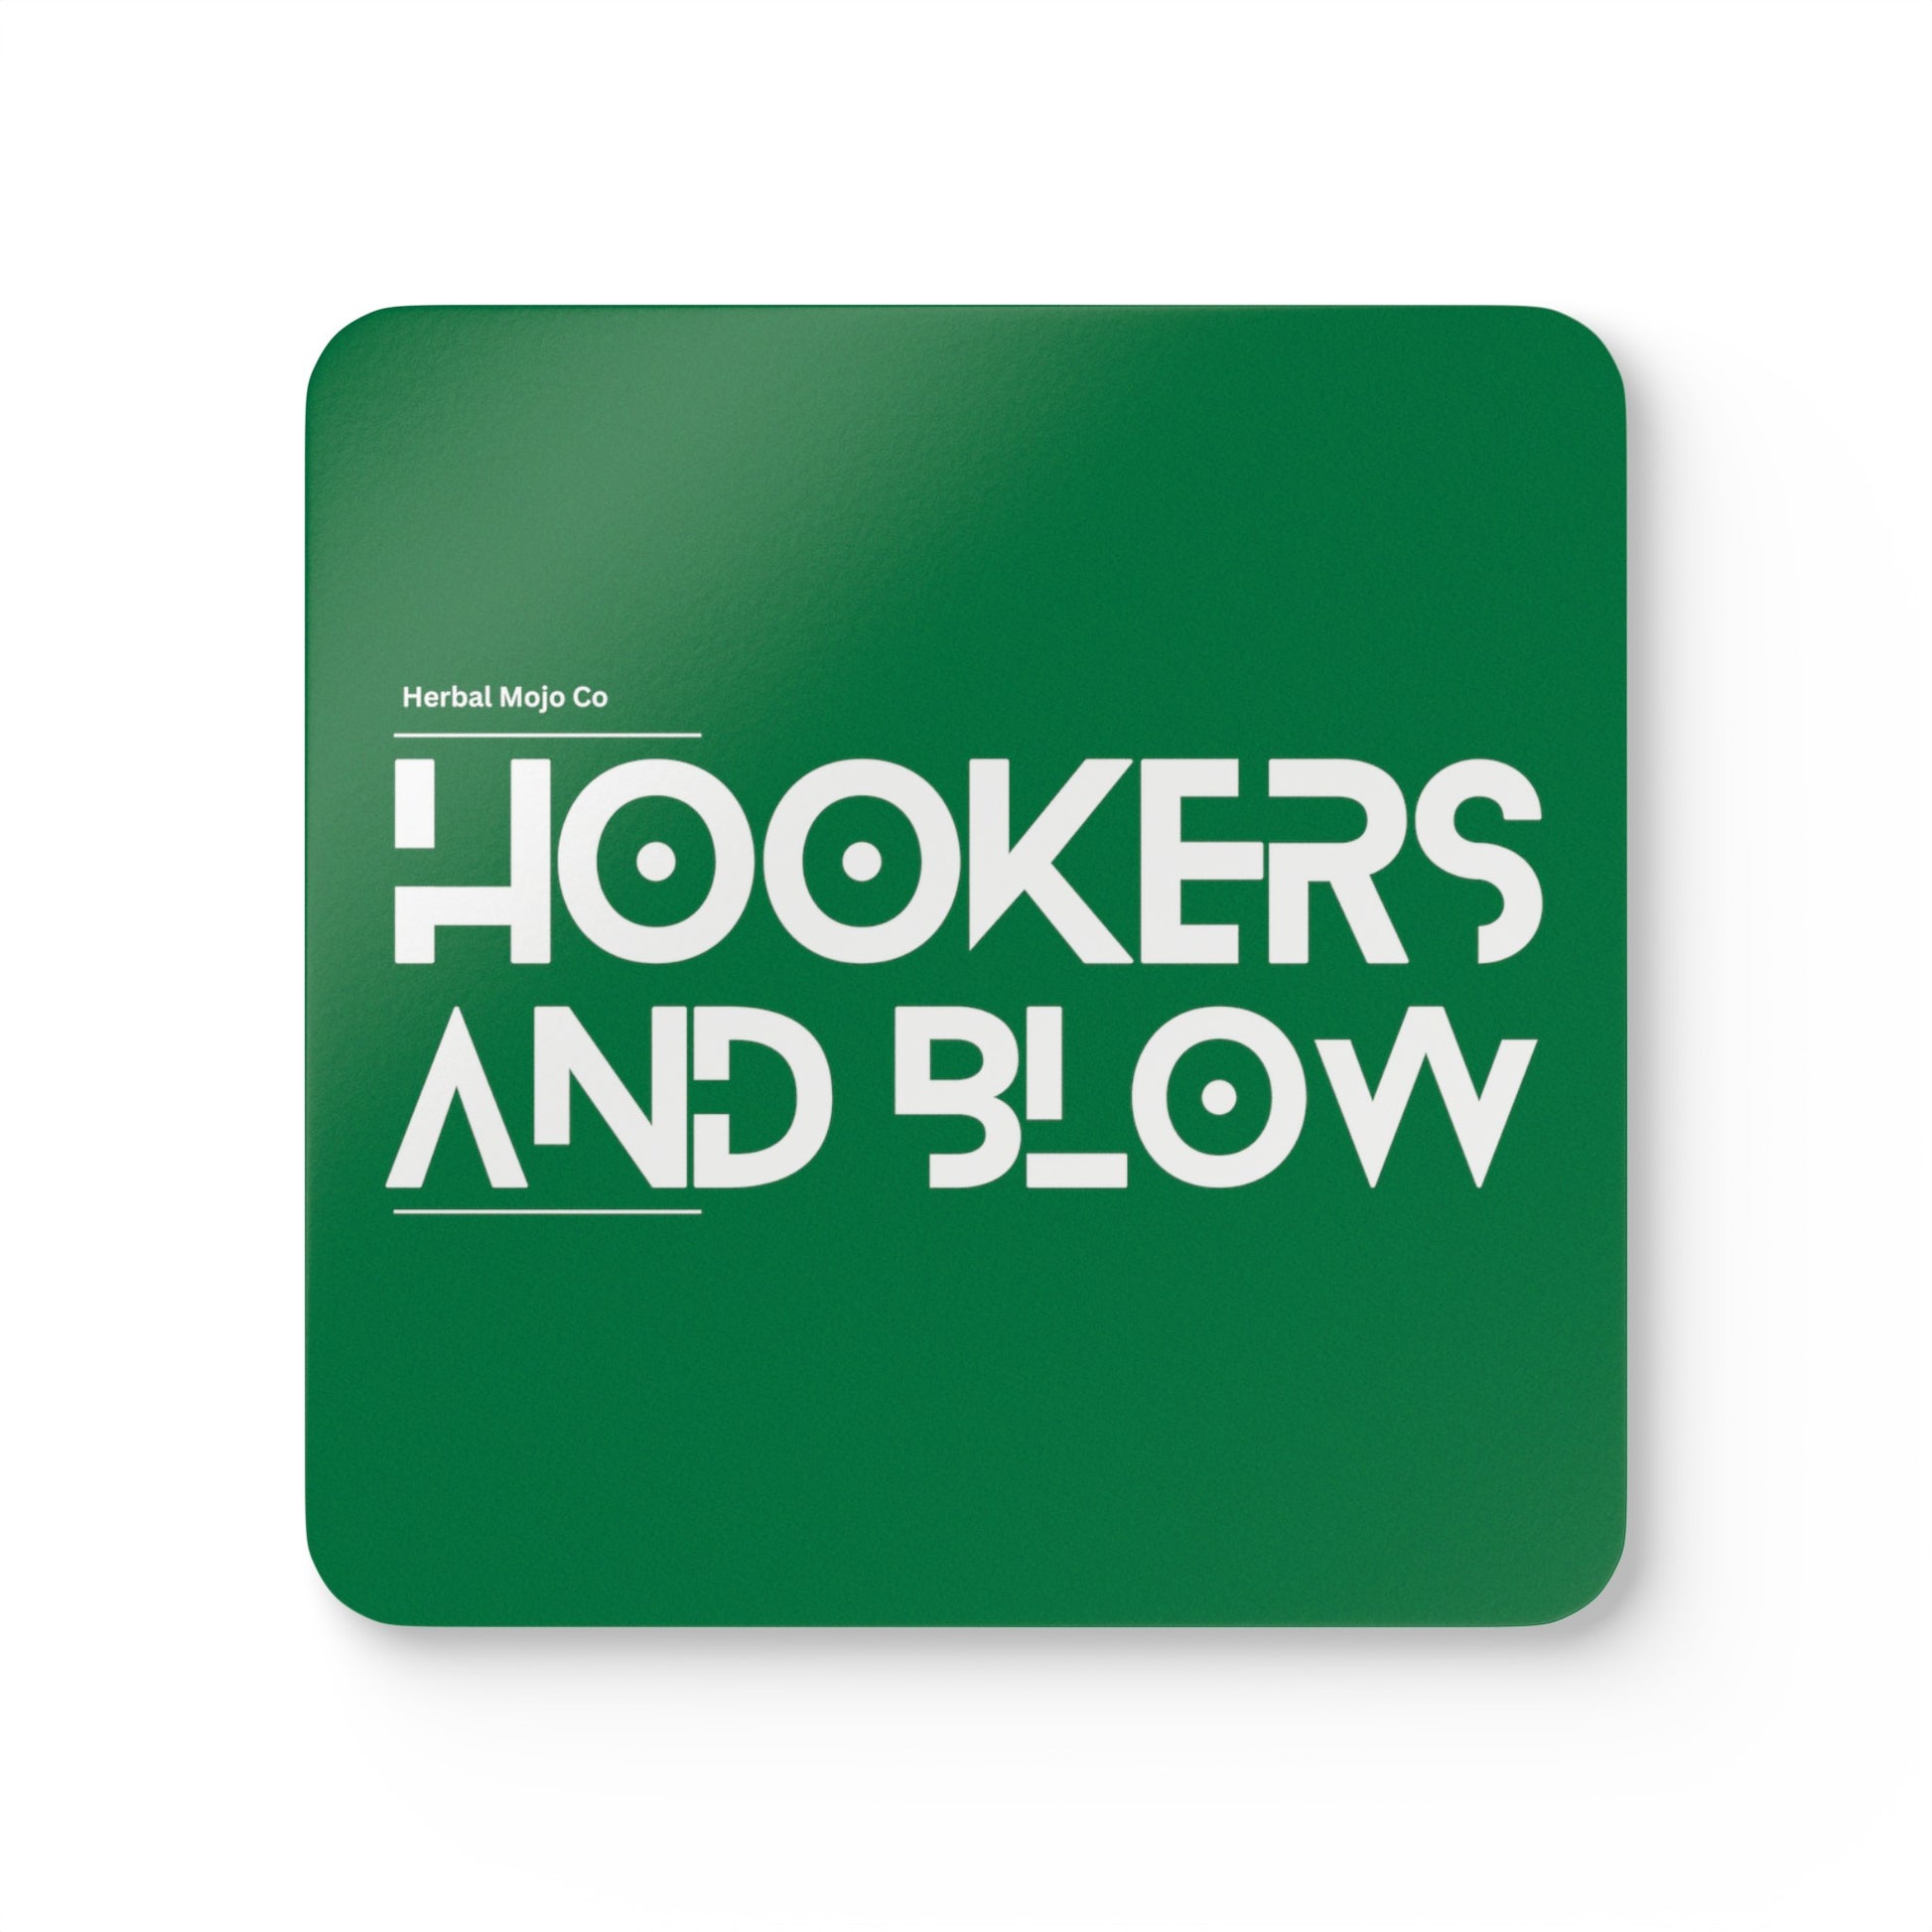 Stamina for Men Hookers & Blow Coaster single coaster product shot with white background